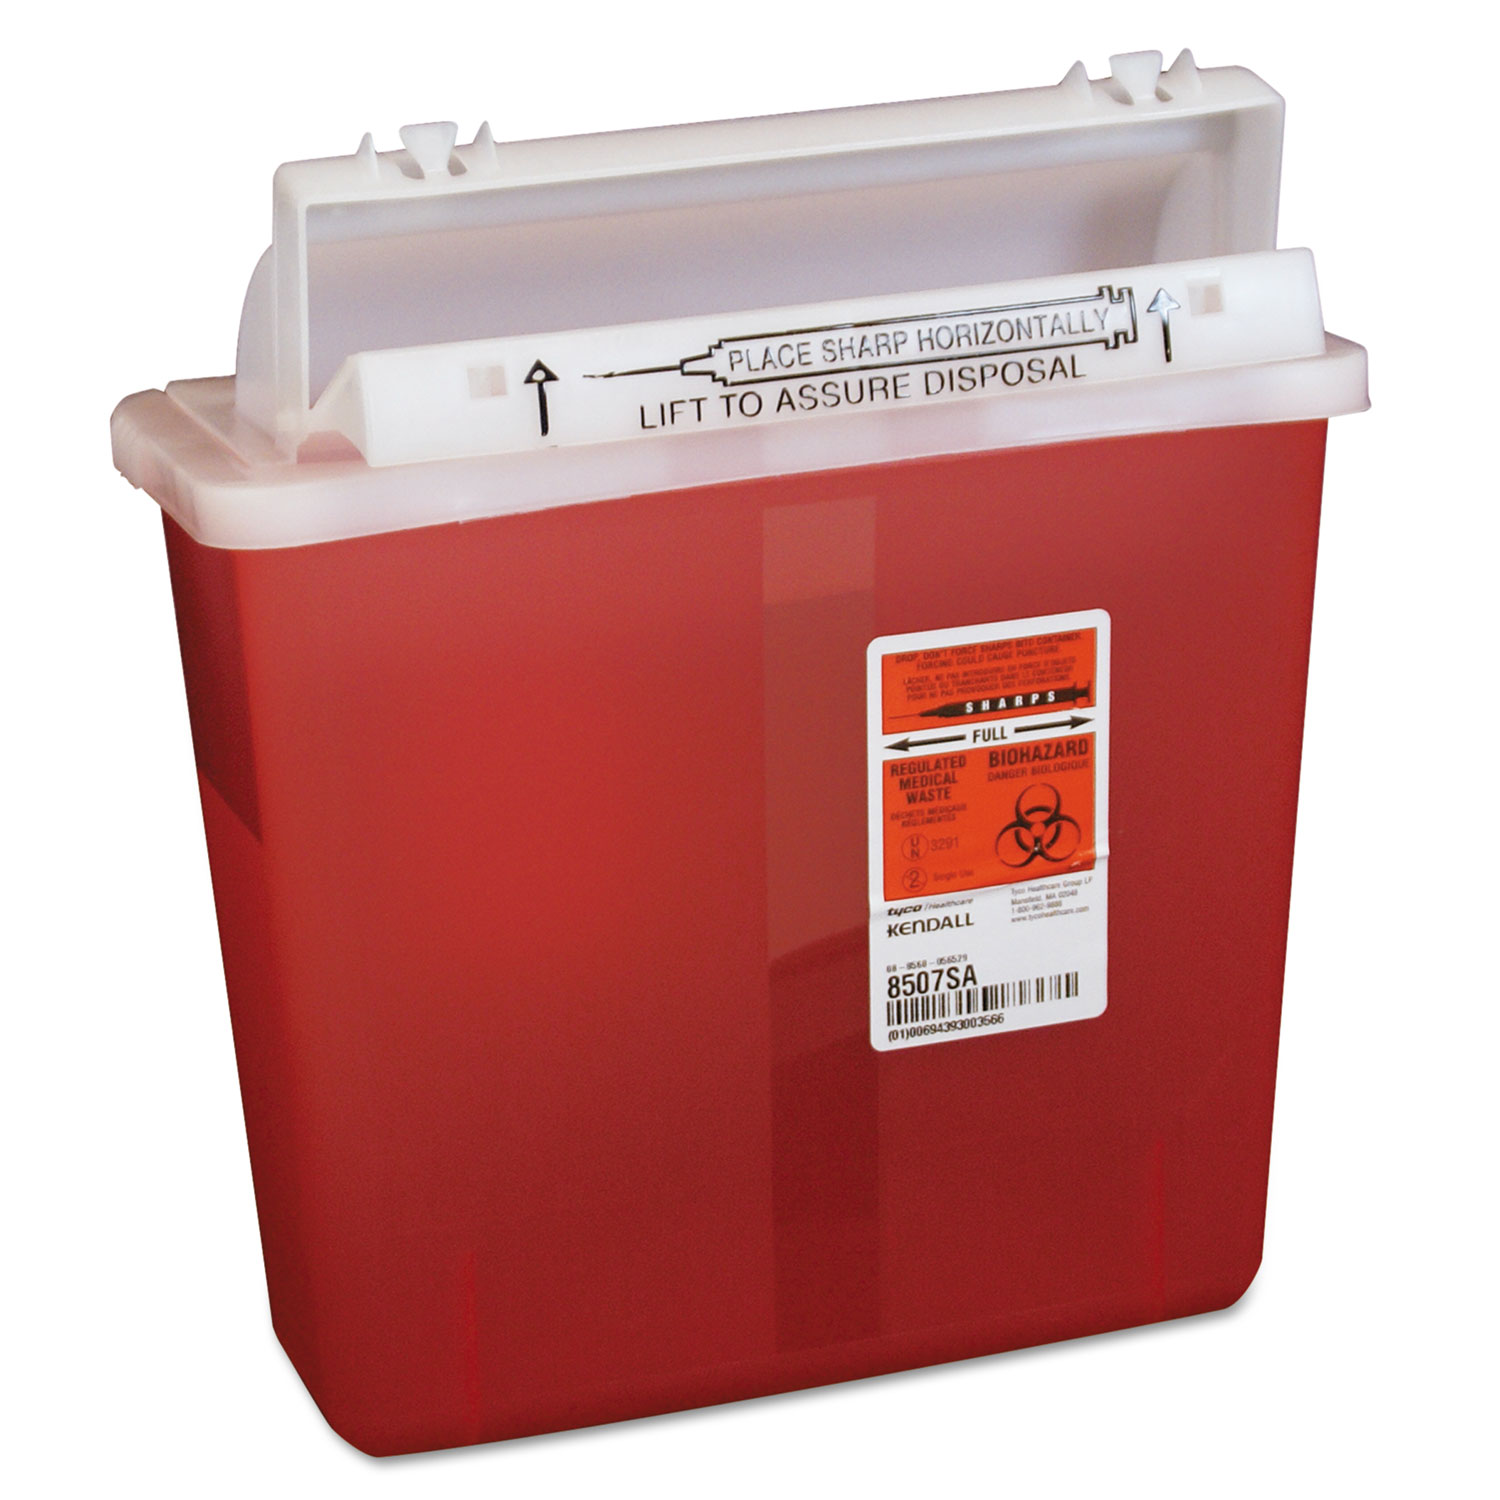 Sharps Containers, Polypropylene, 5 qt, 4 3/4 x 10 3/4 x 11 1/2, Red